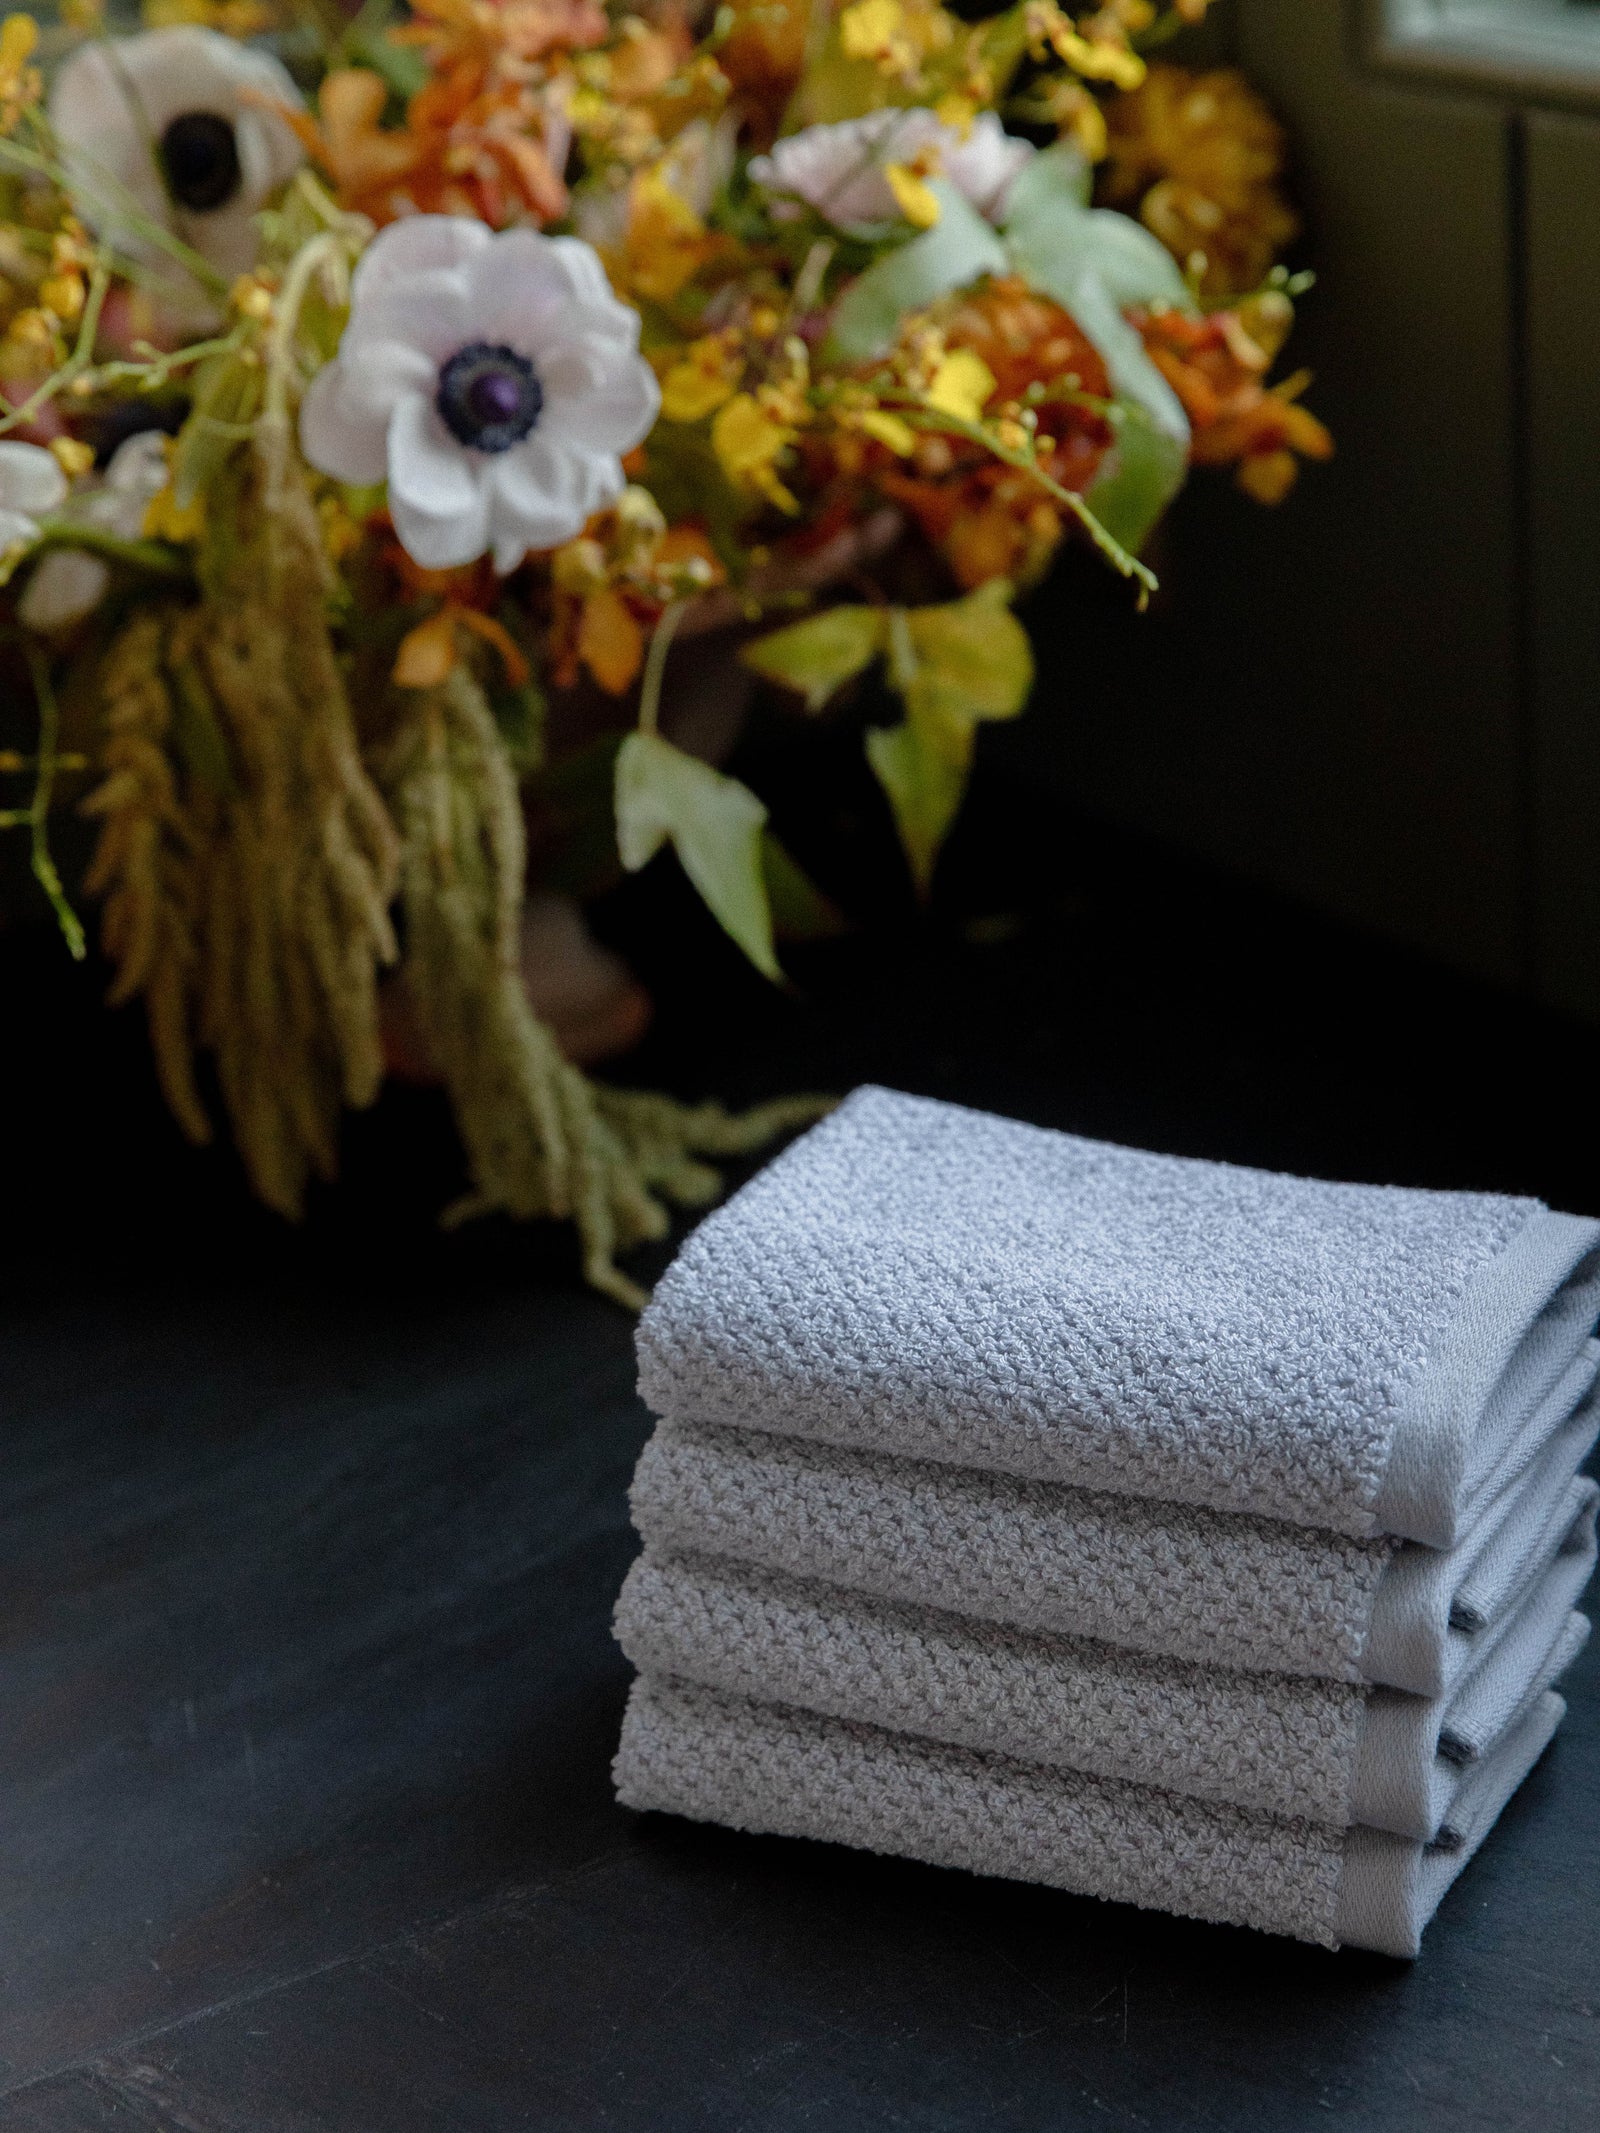 Nantucket Wash Cloths in the color Heathered Harbor Mist. Photo of Nantucket Wash Cloths taken with the Wash Cloths resting on a countertop in a bathroom. 